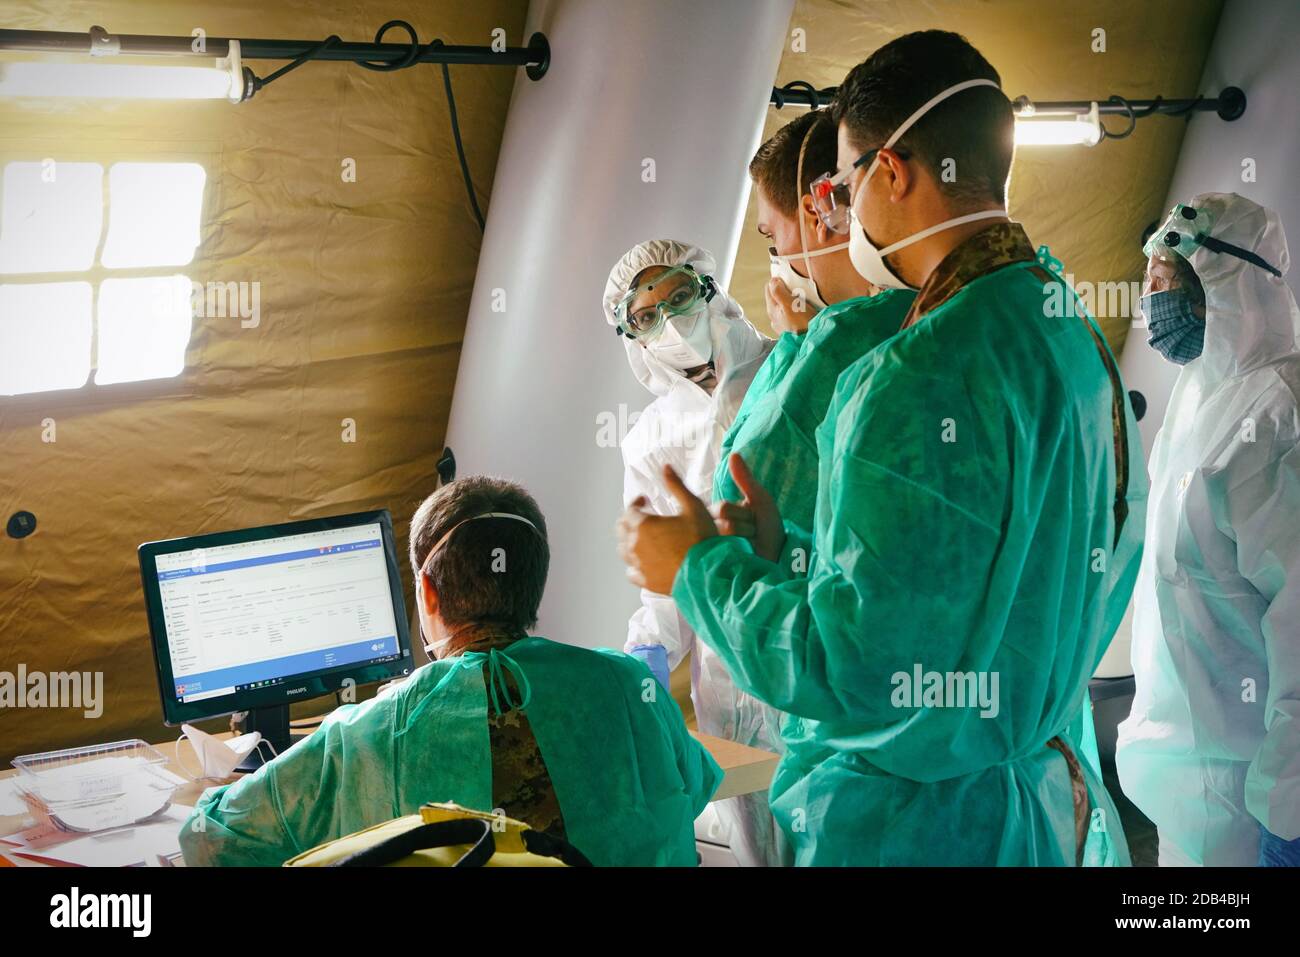 A group of medical staff in a field hospital set up for the covid emergency. Turin, Italy - november 2020 Stock Photo